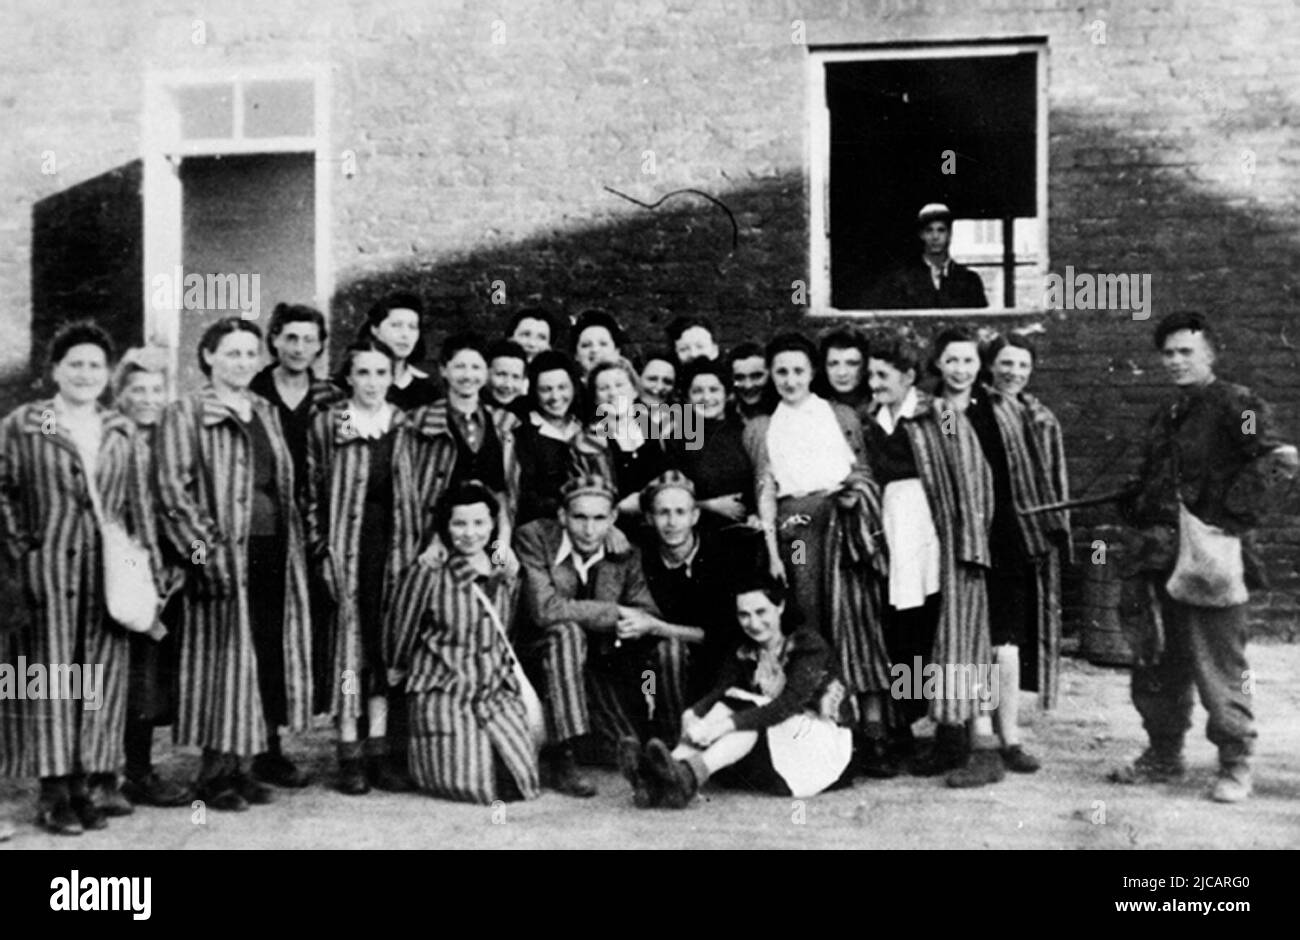 Jewish prisoners of Gęsiowka, a German-Nazi Camp in Warsaw liberated in August 5, 1944 by Polish soldiers from Battalion 'Zośka' of Home Army in the beginning of Warsaw Uprising. Many of these released prisoners joined the Home Army. The Warsaw Uprising was a massive attempt by the Polish Home Army to defeat the Wehrmacht and SS Occupation towards the end of WW2. Stock Photo